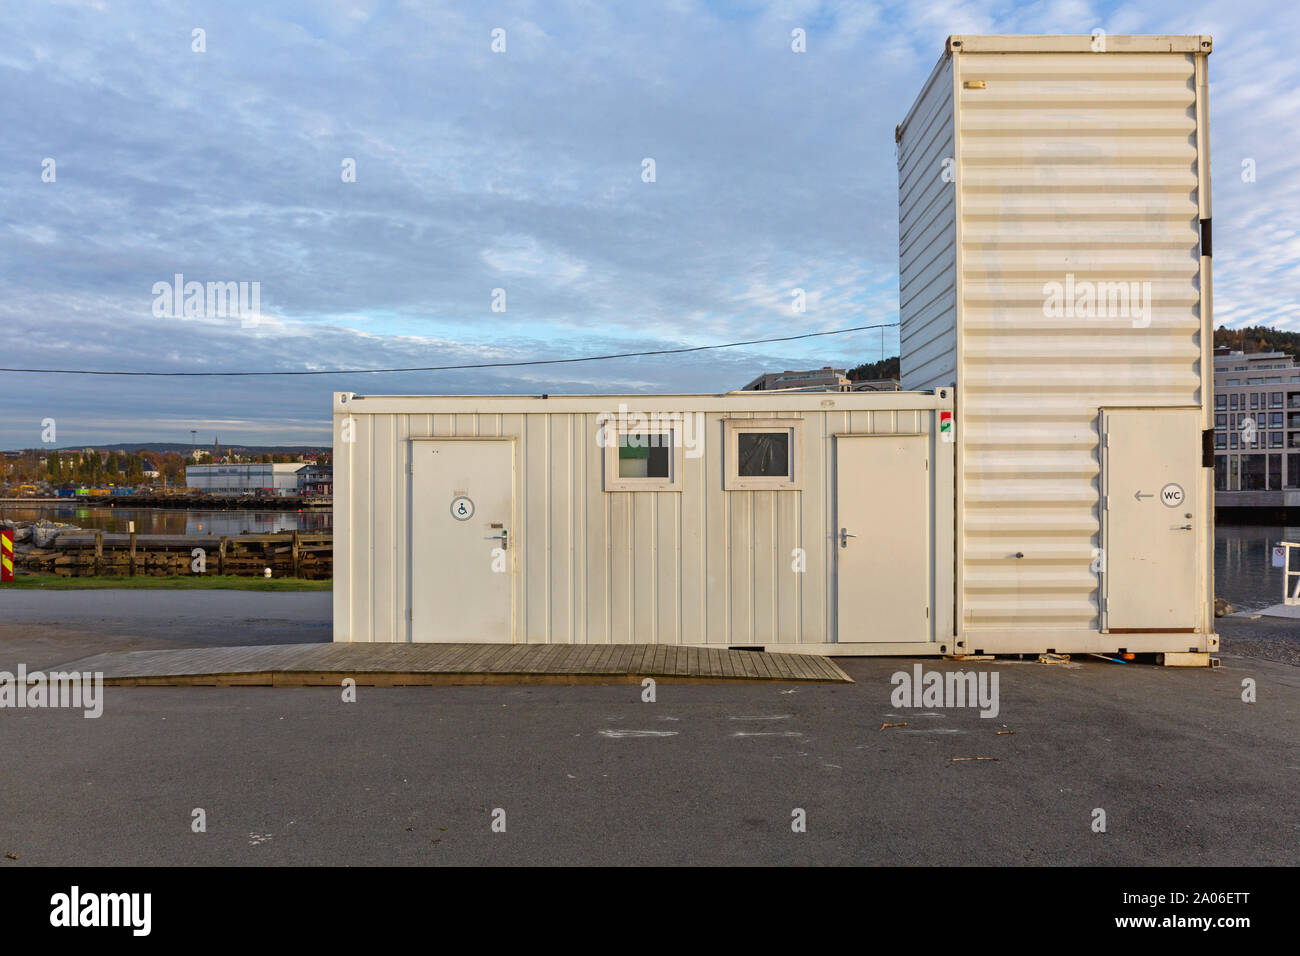 Temporary Public Toilet in Converted Cargo Container Stock Photo